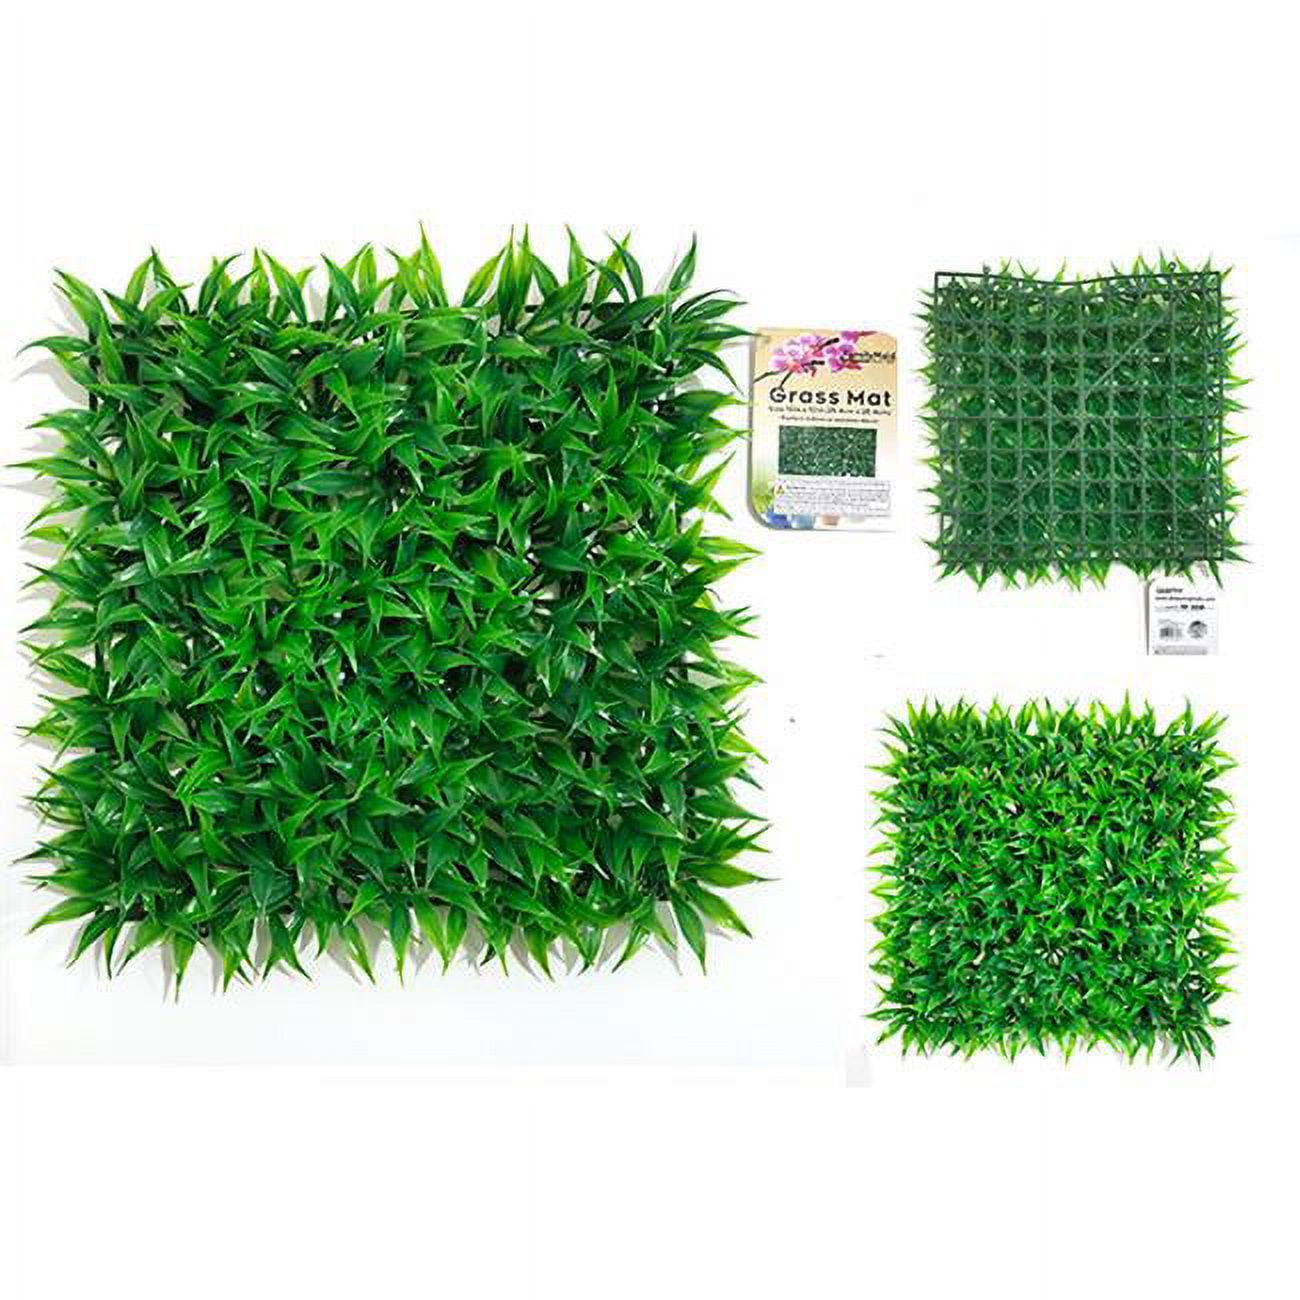 Picture of Familymaid 27723 10 x 10 in. Grass Mat